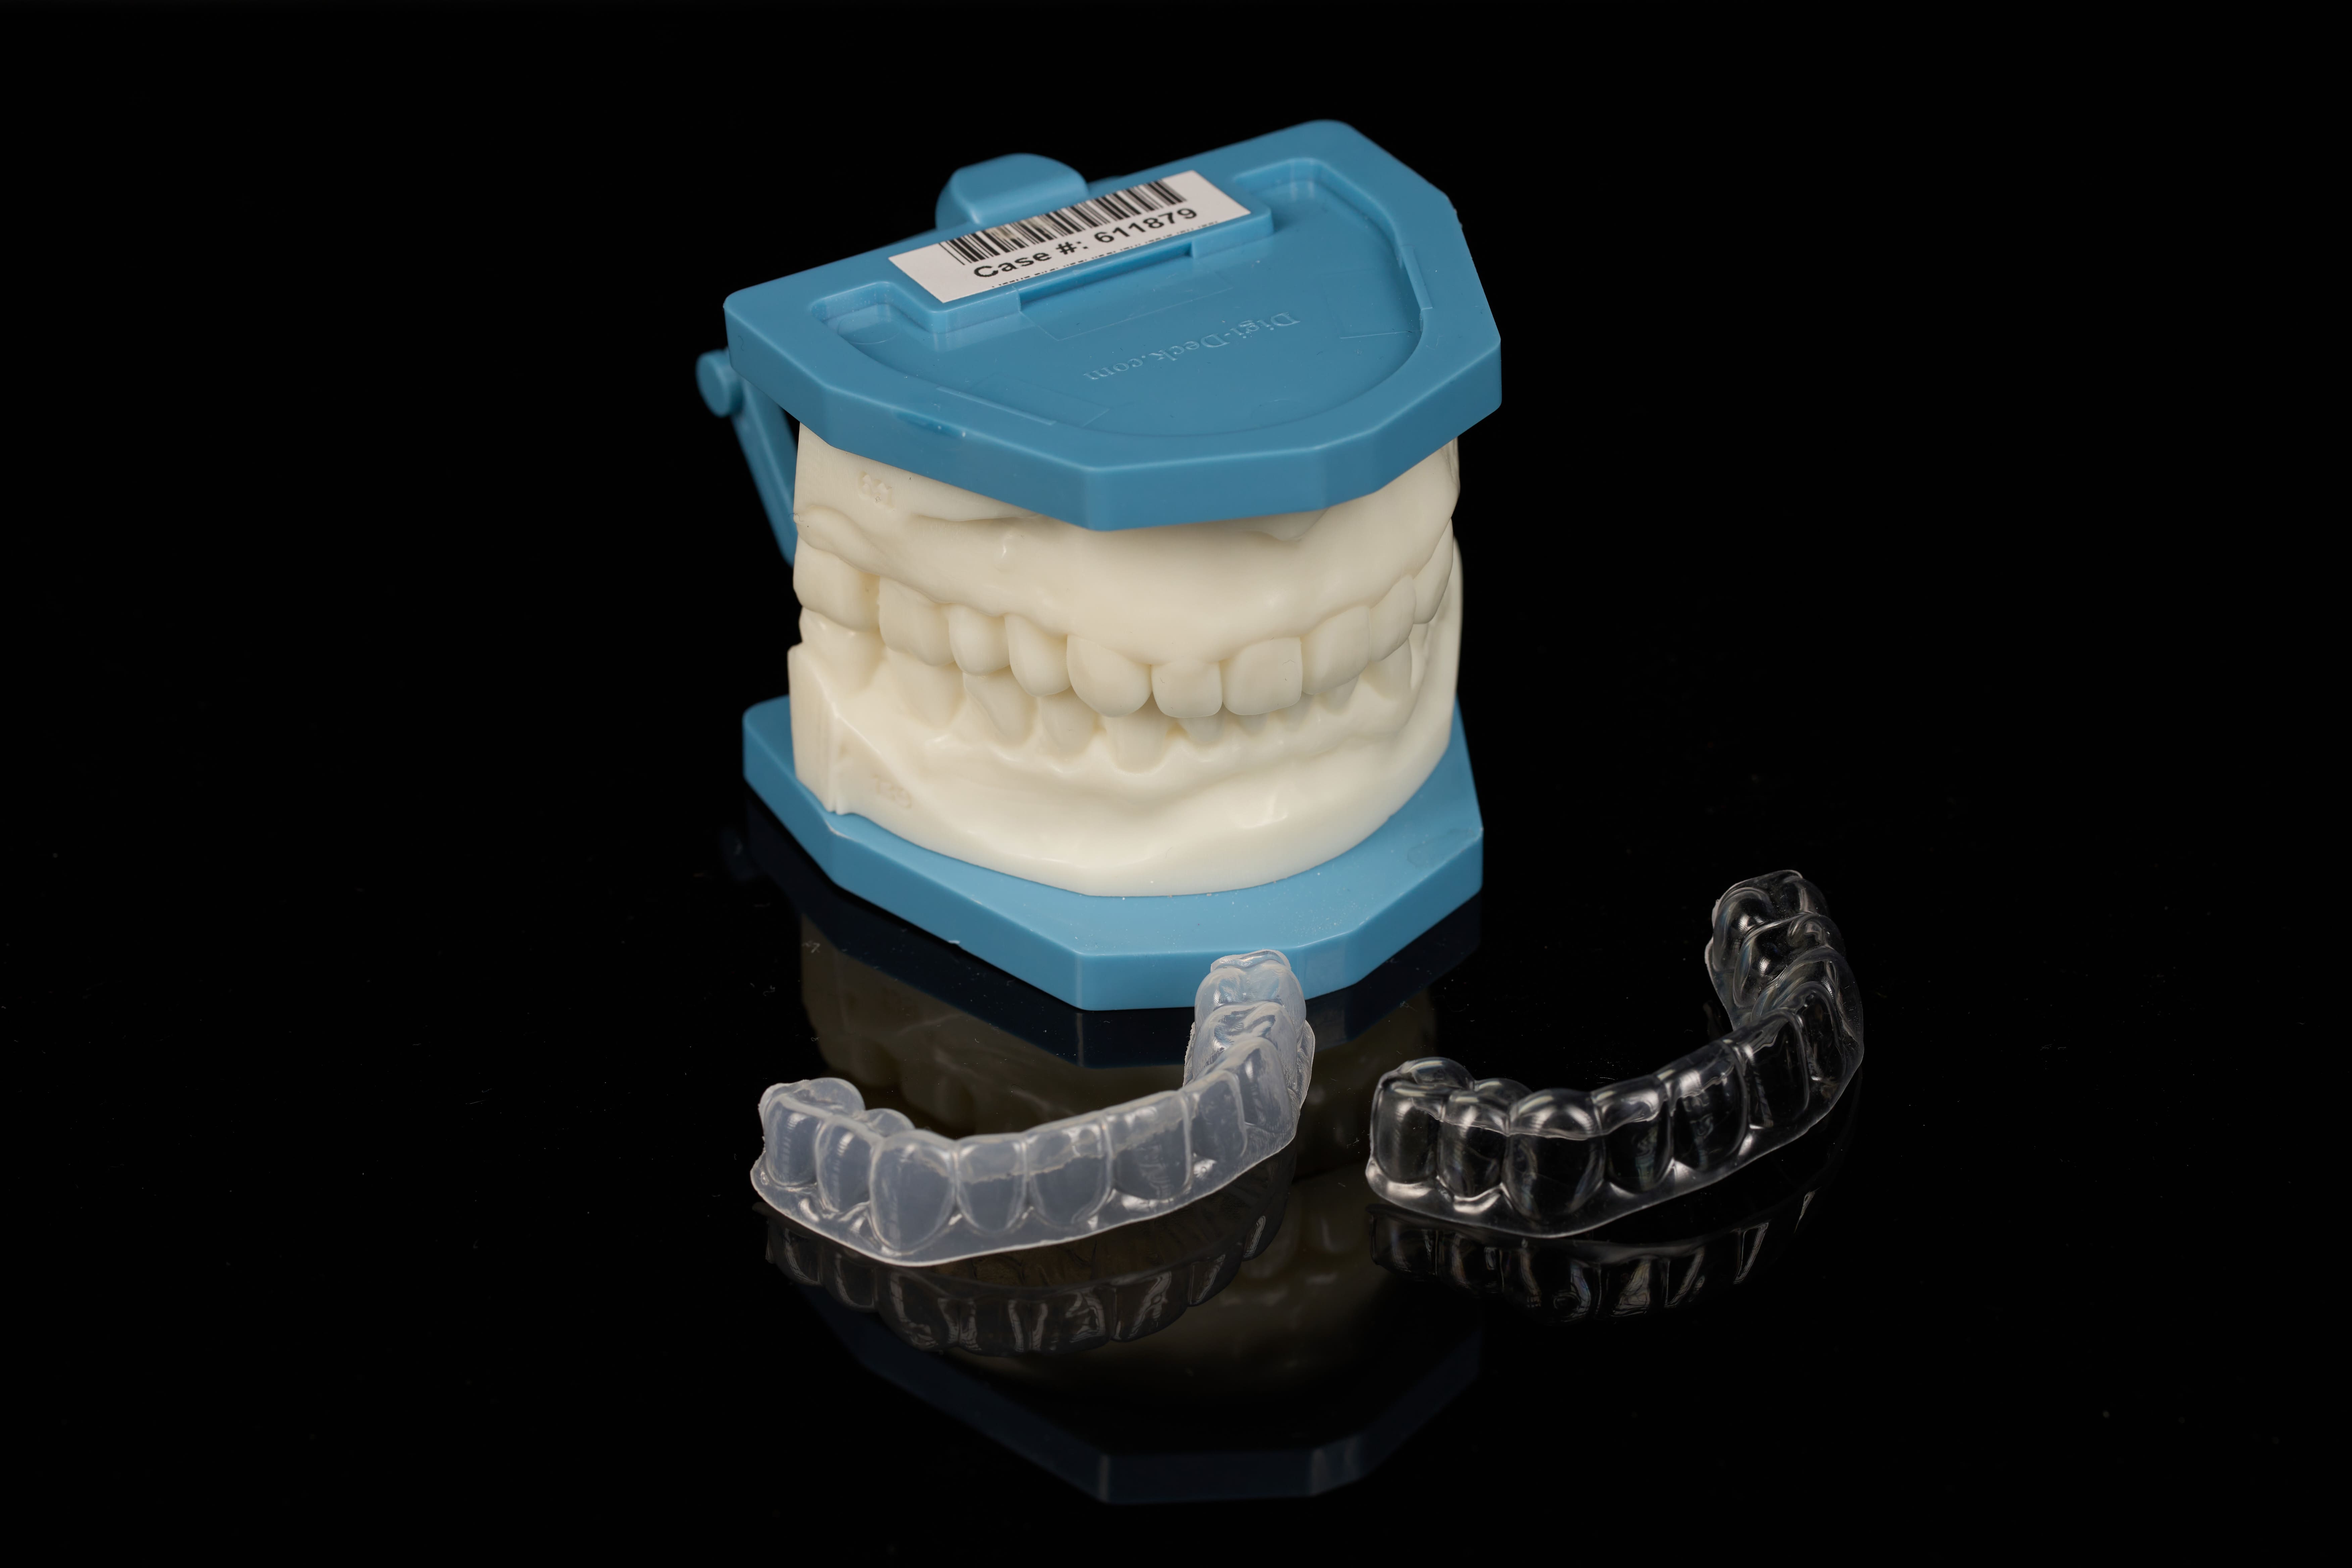 TRIAD Diagnostic Wax-up Case Planning Product for Dental Labs